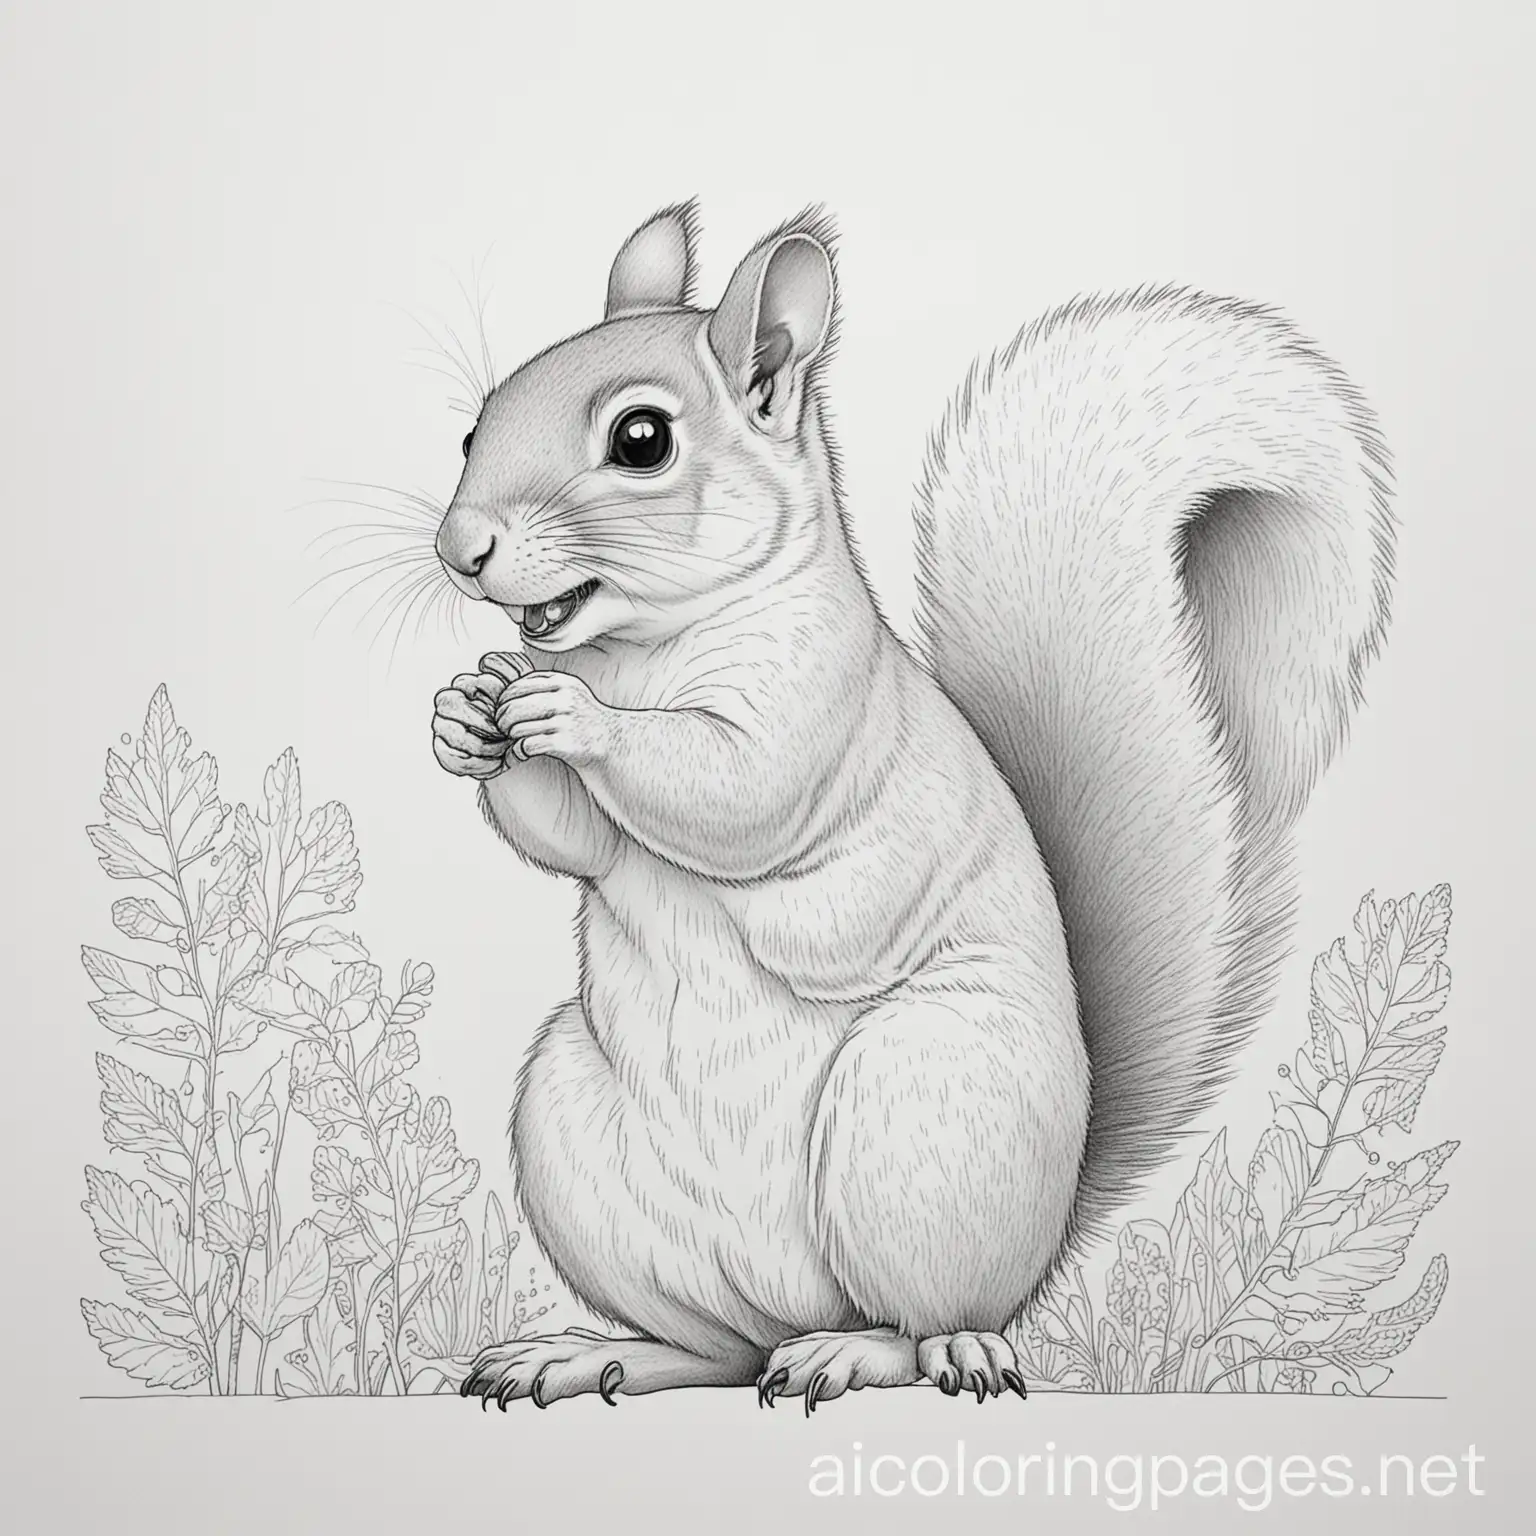 Happy-Squirrel-Coloring-Page-in-Simple-Line-Art-Style-on-White-Background